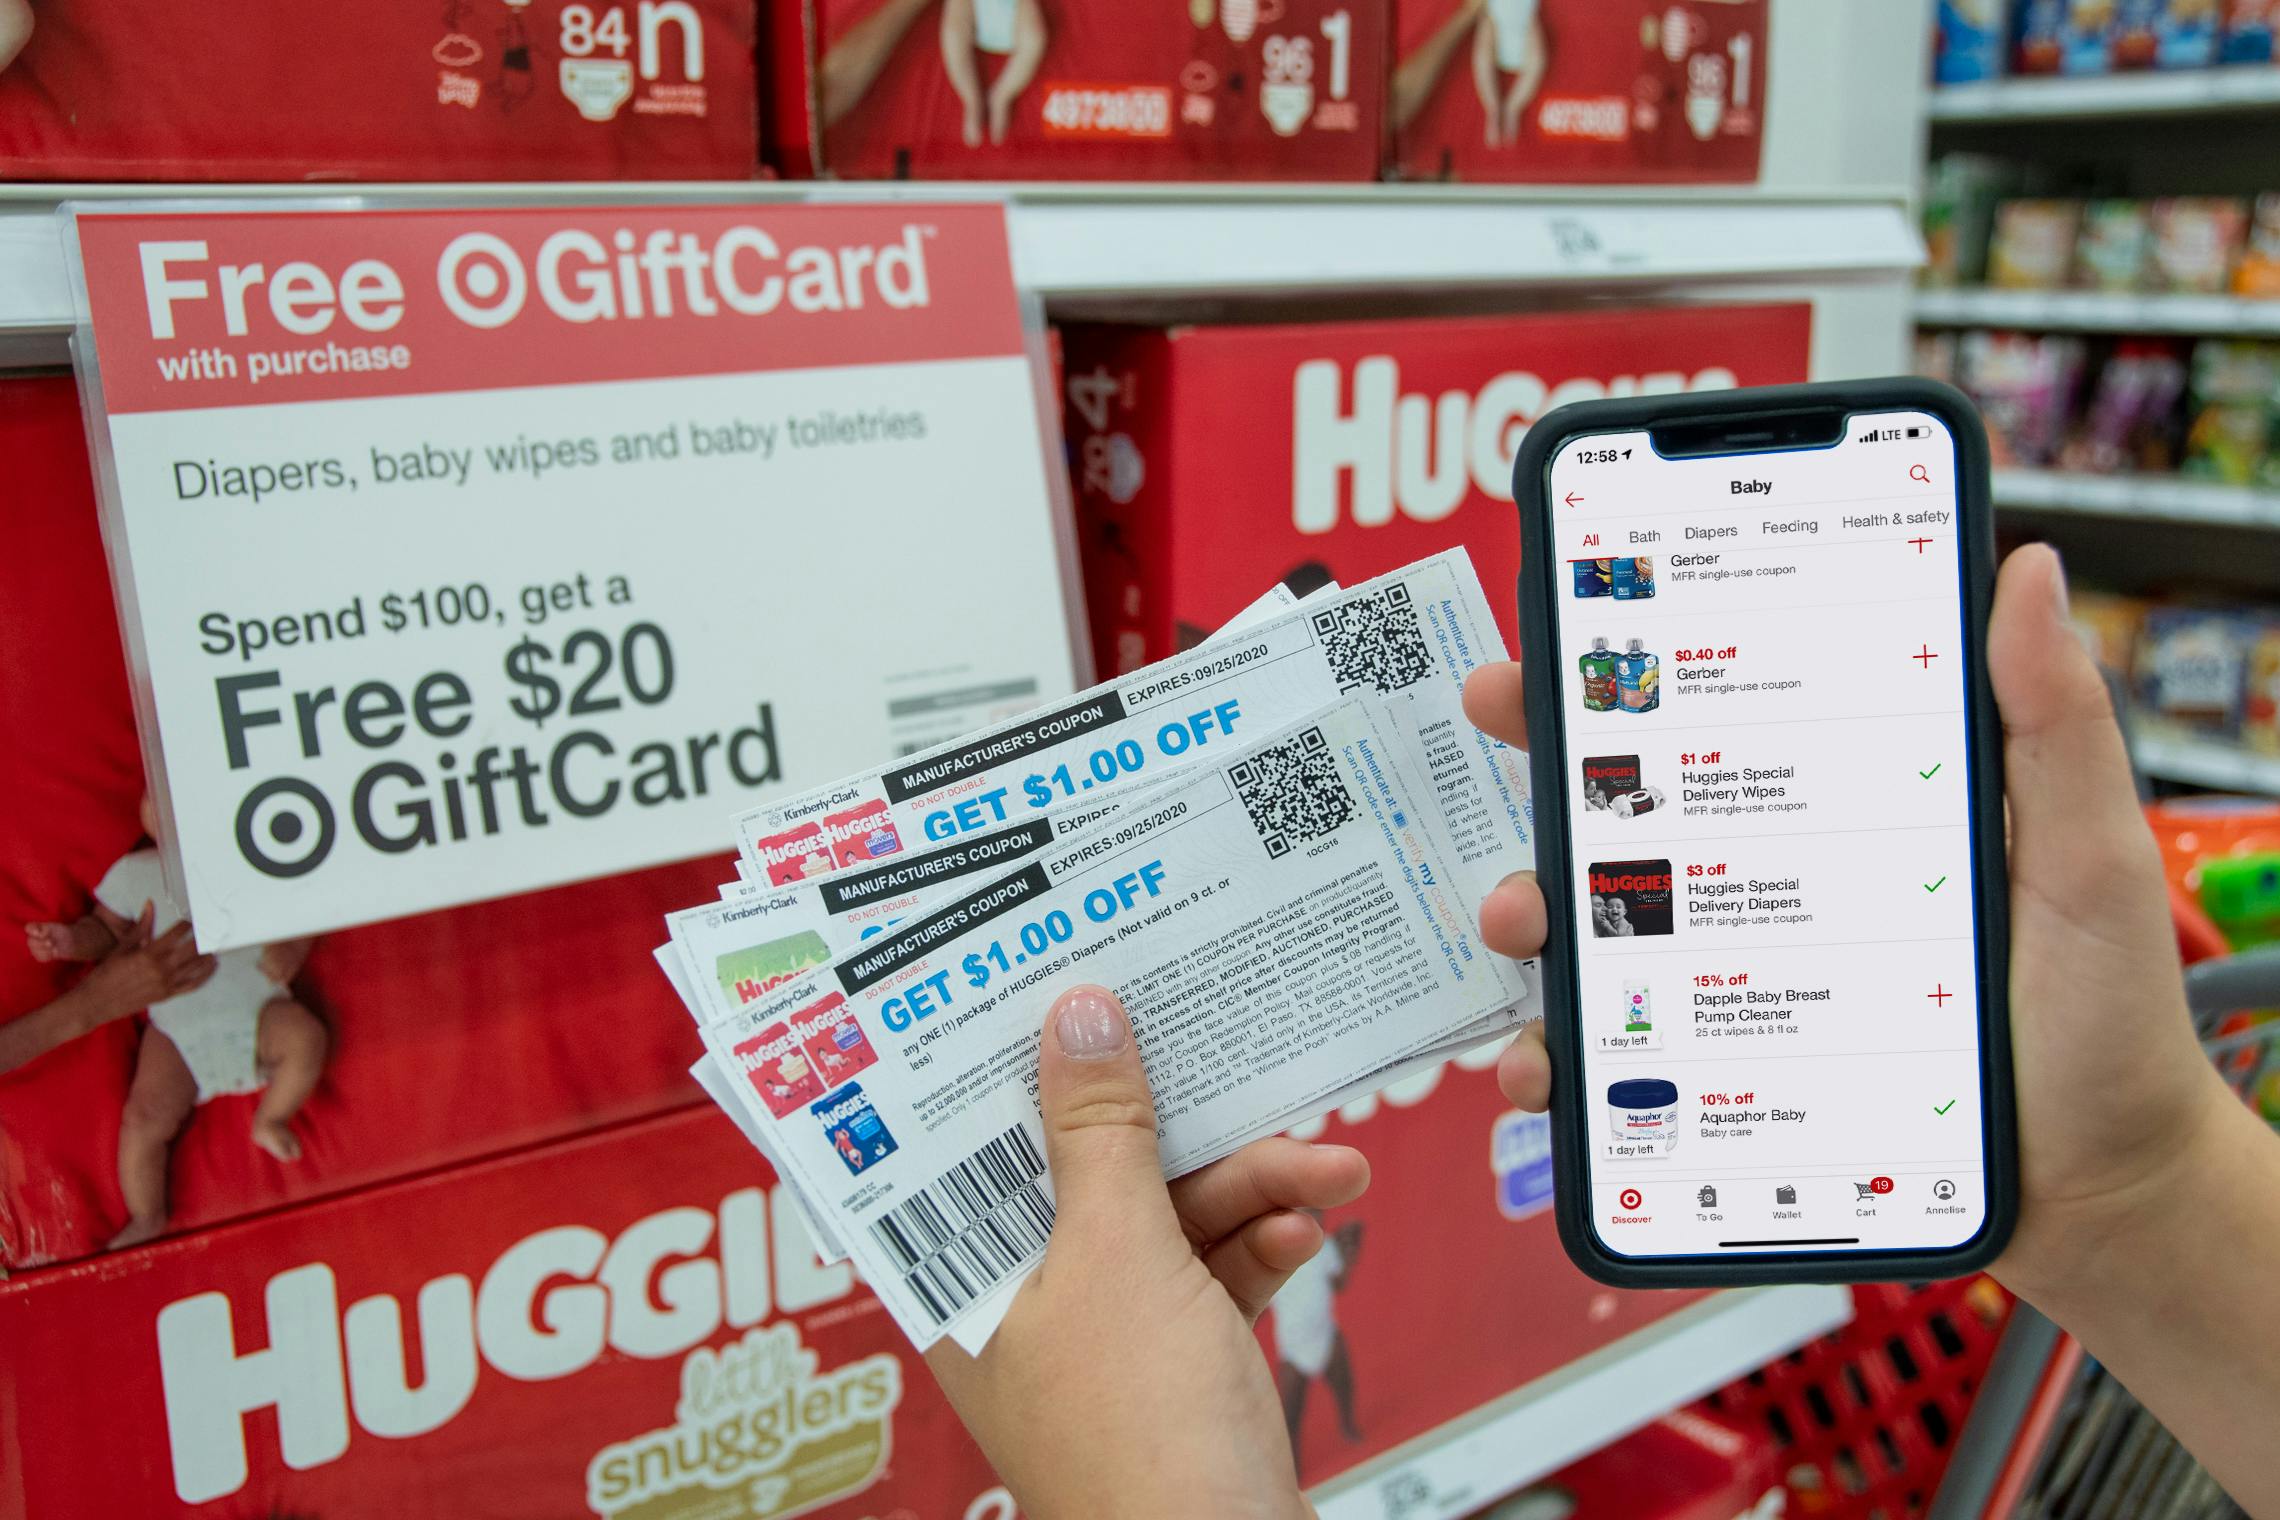 Coupons and a cell phone next to huggies diapers and a Free Gift Card Sign